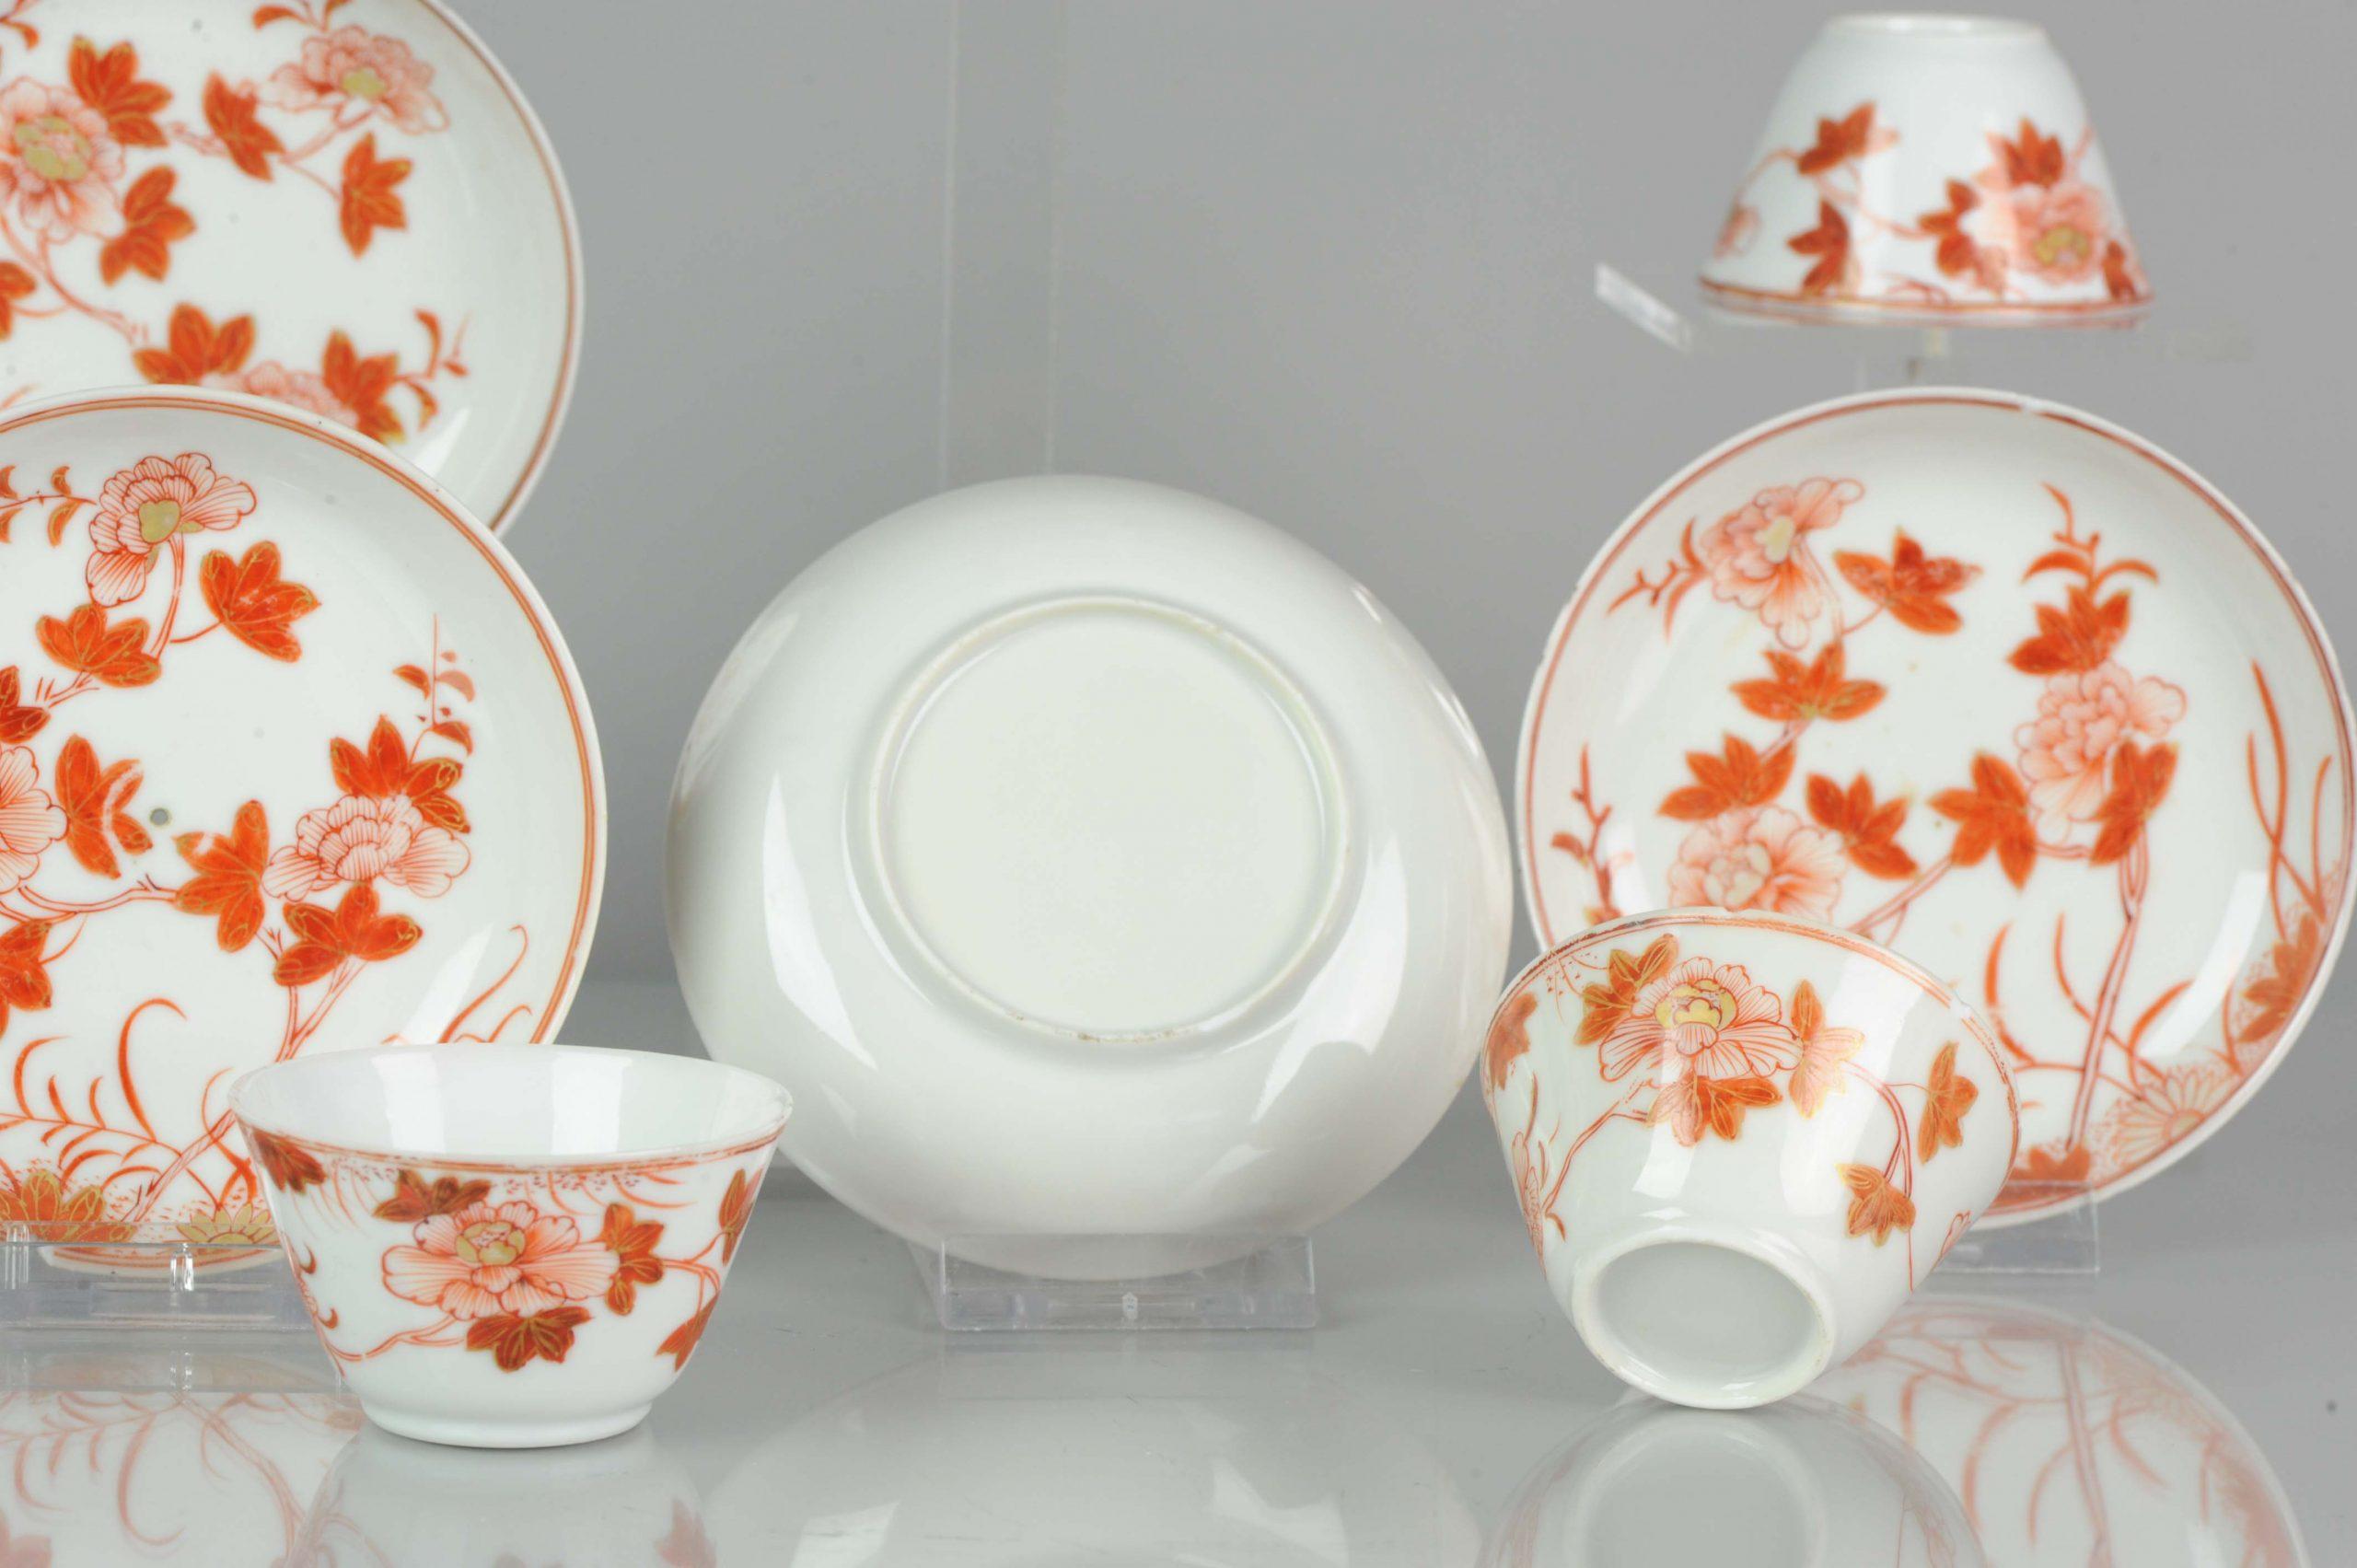 A very nice set of 18th century tea bowls, Qing Period. 4 sets and 1 loose cup. The painting is of very high quality.

Additional information:
Material: Porcelain & Pottery
Region of Origin: China
Period: 18th century
Age:Pre-1800
Condition: Overall